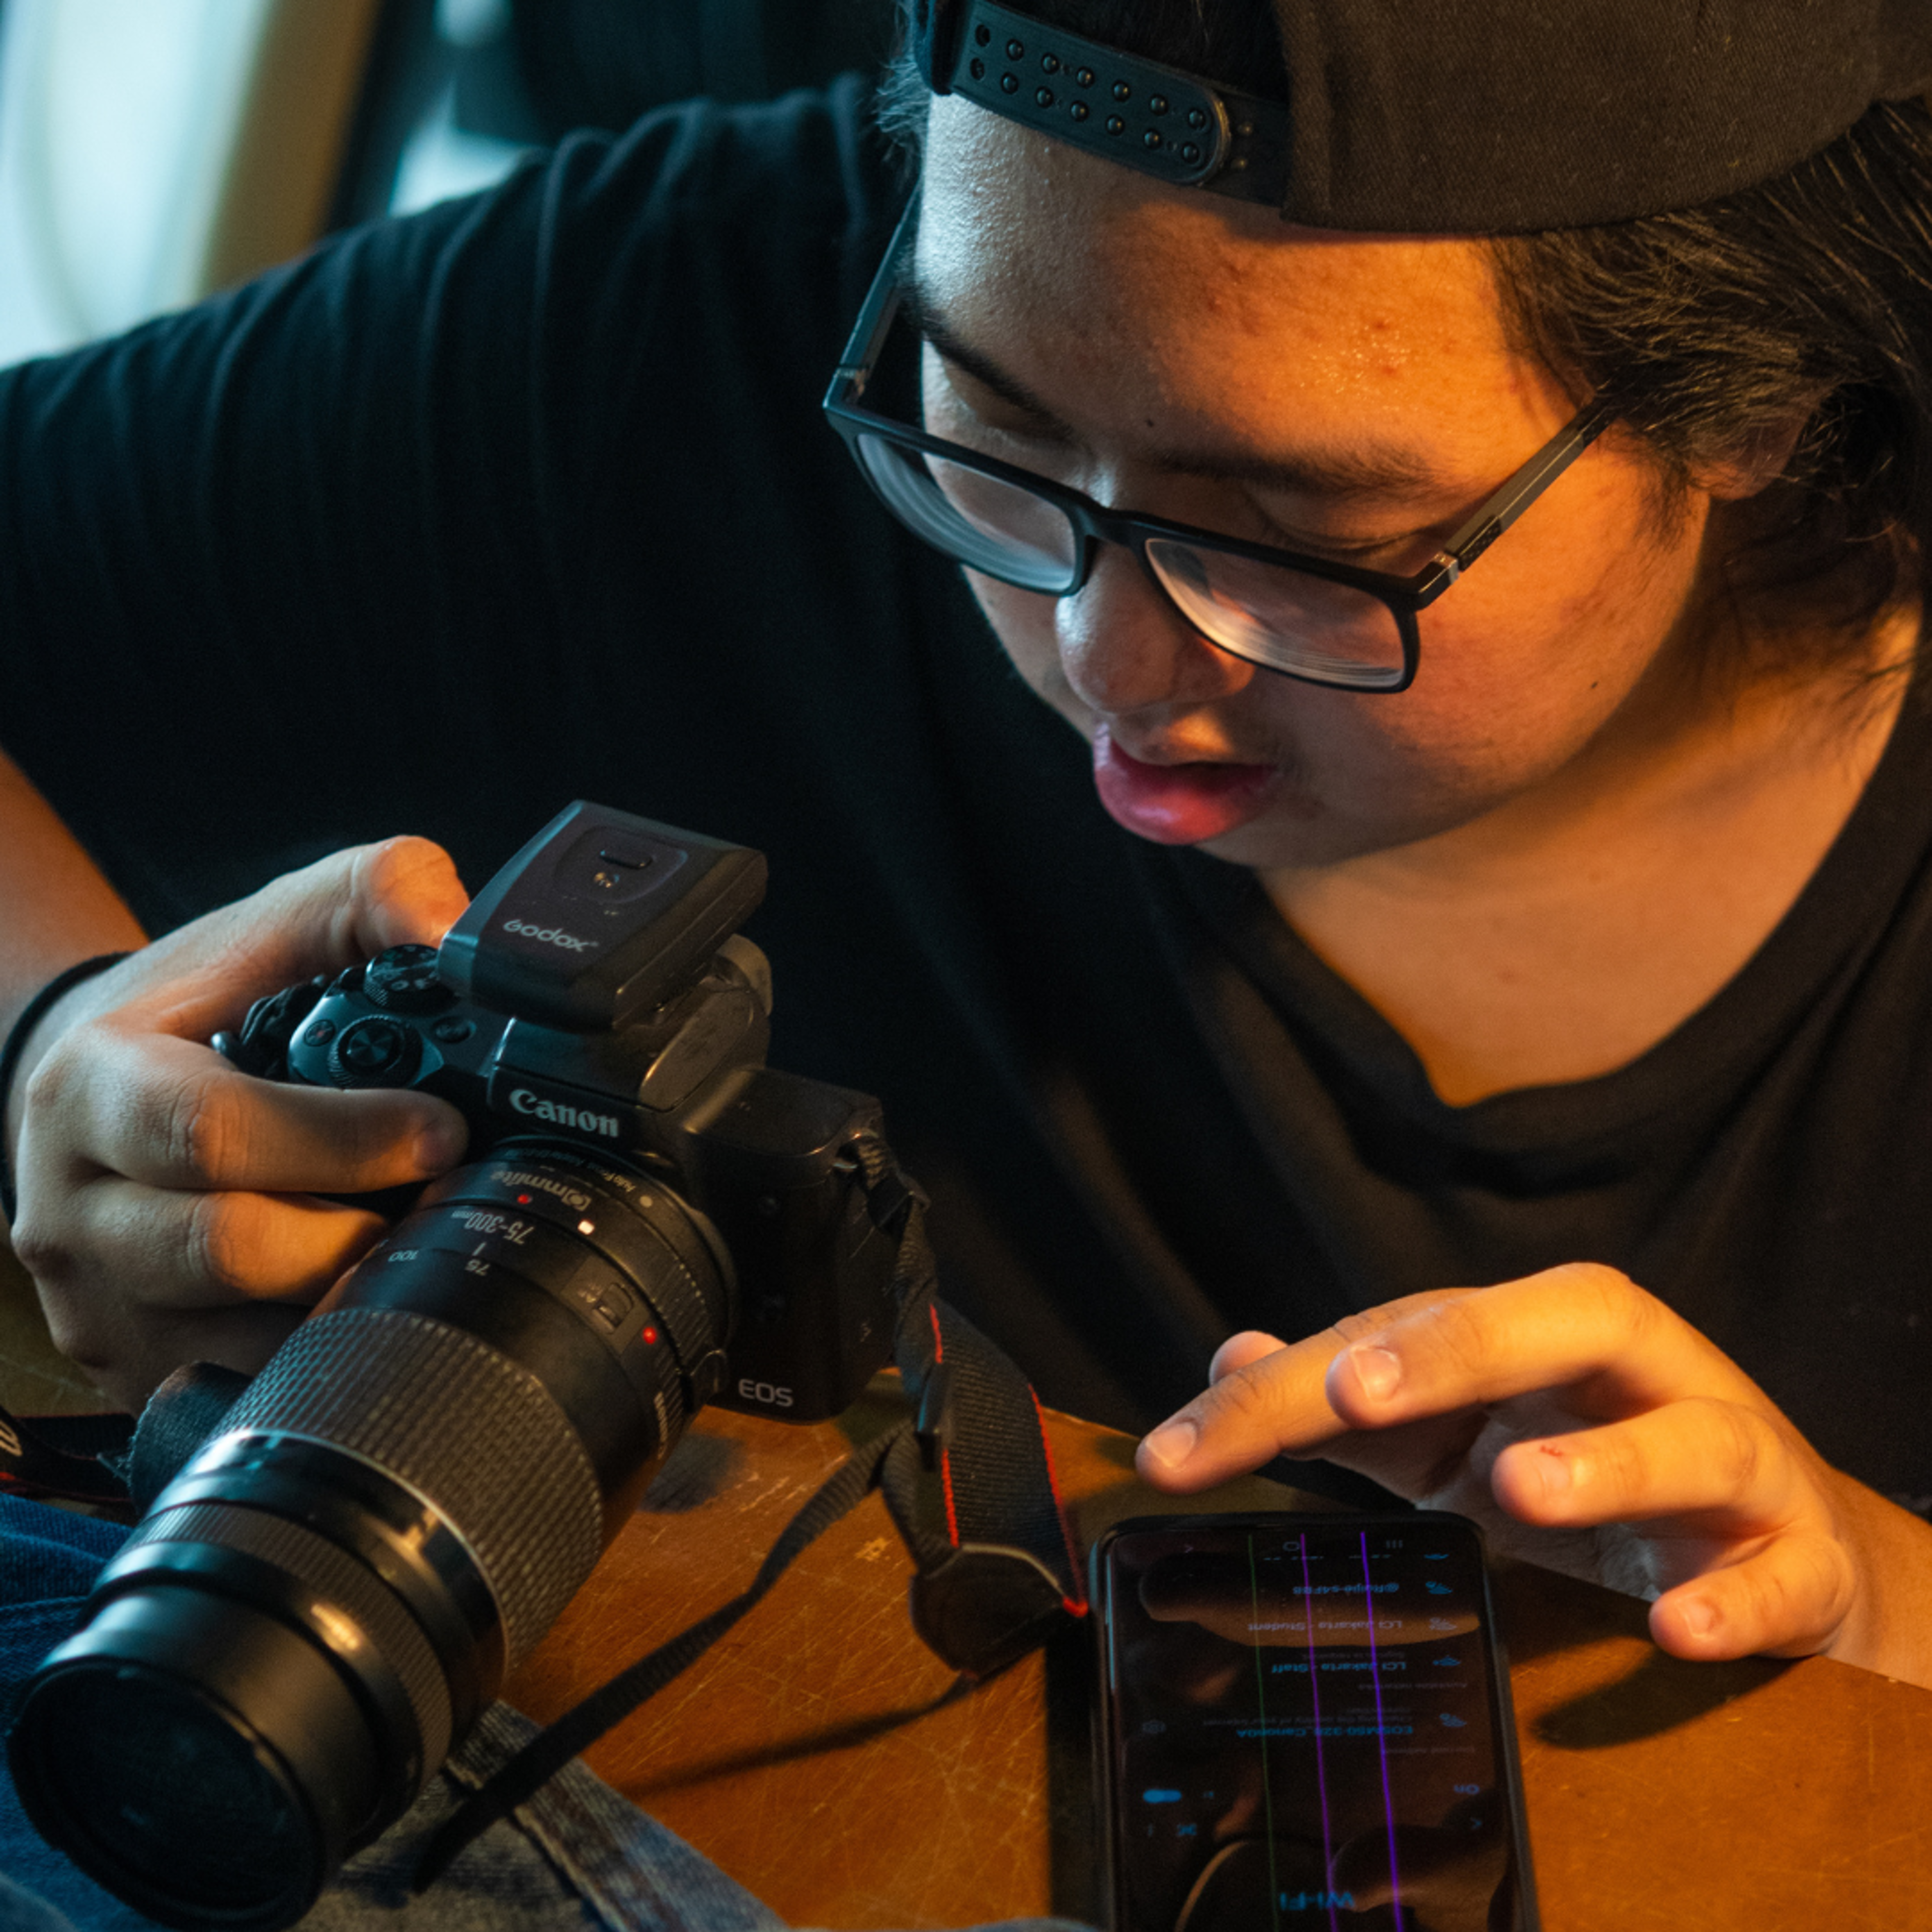 A focused individual adjusts a DSLR camera, with a lens cap and a smartphone displaying graphs placed on a wooden surface nearby.